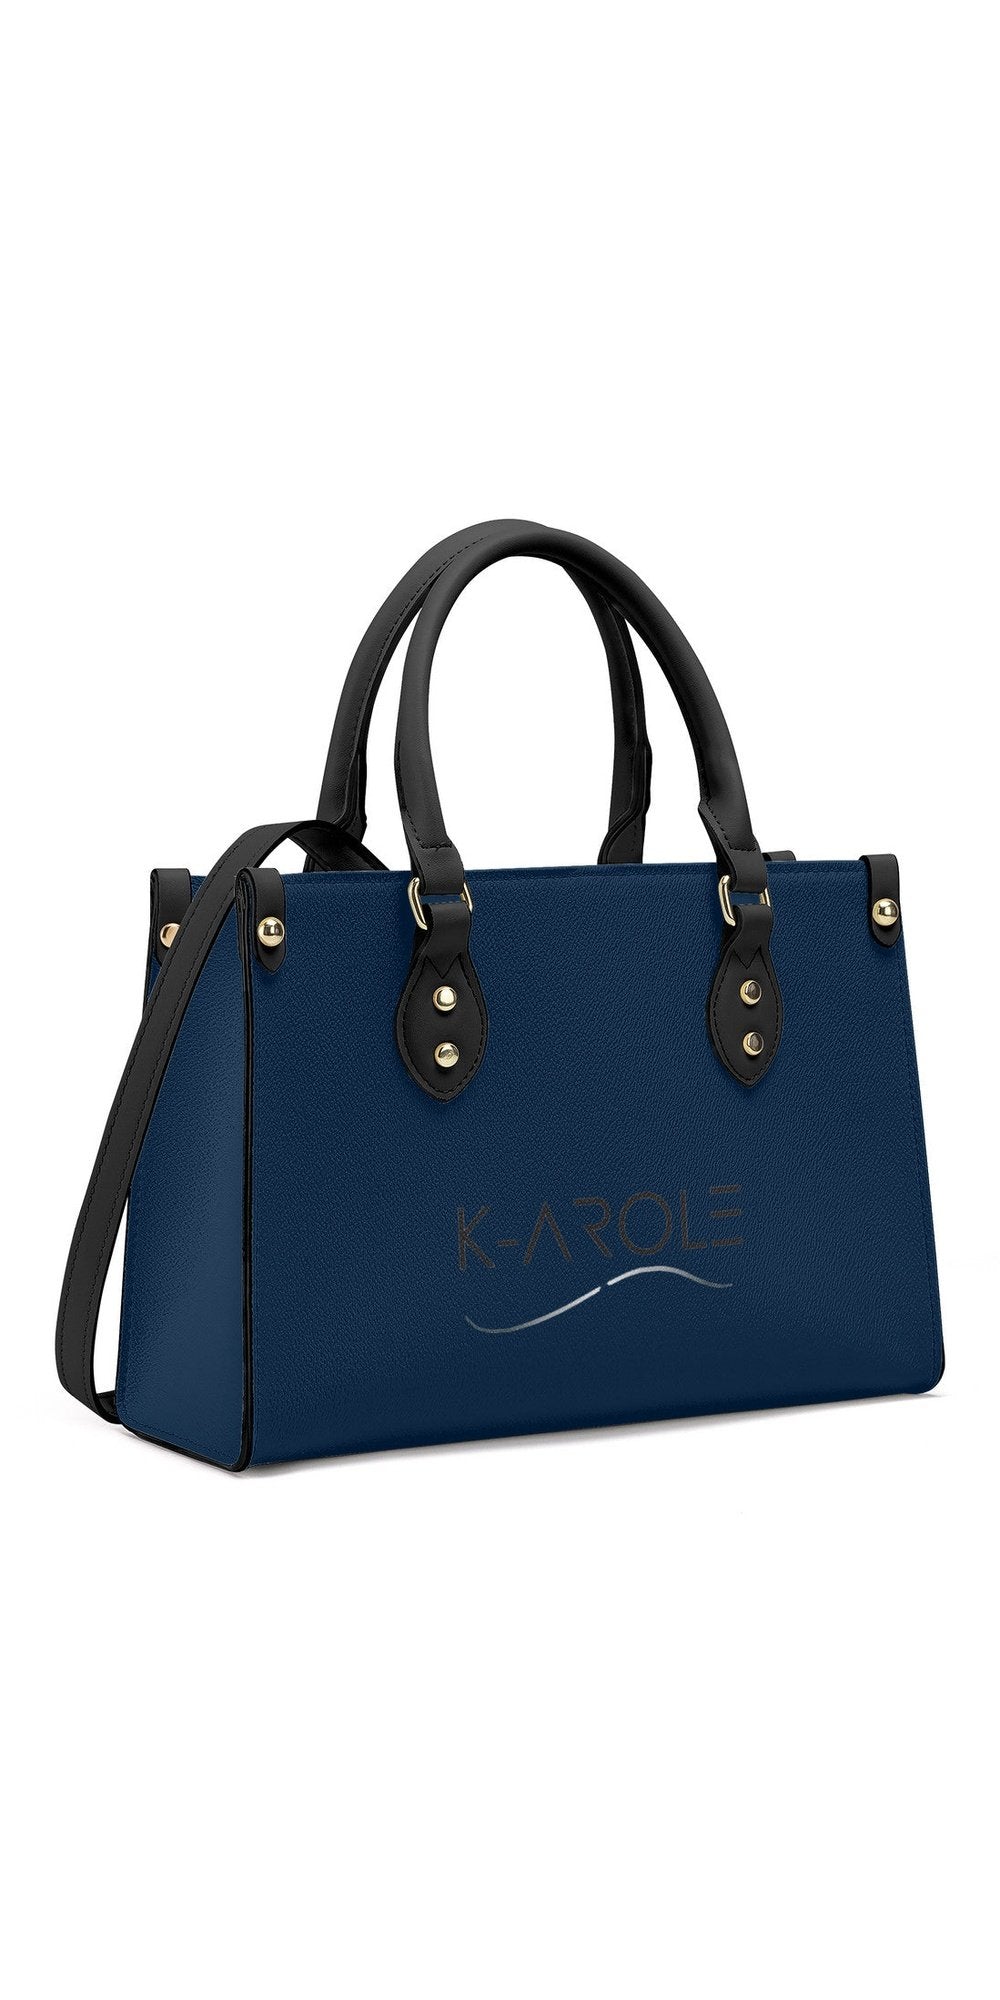 Elevate Your Fashion Game with Our Stylish Handbag Tote